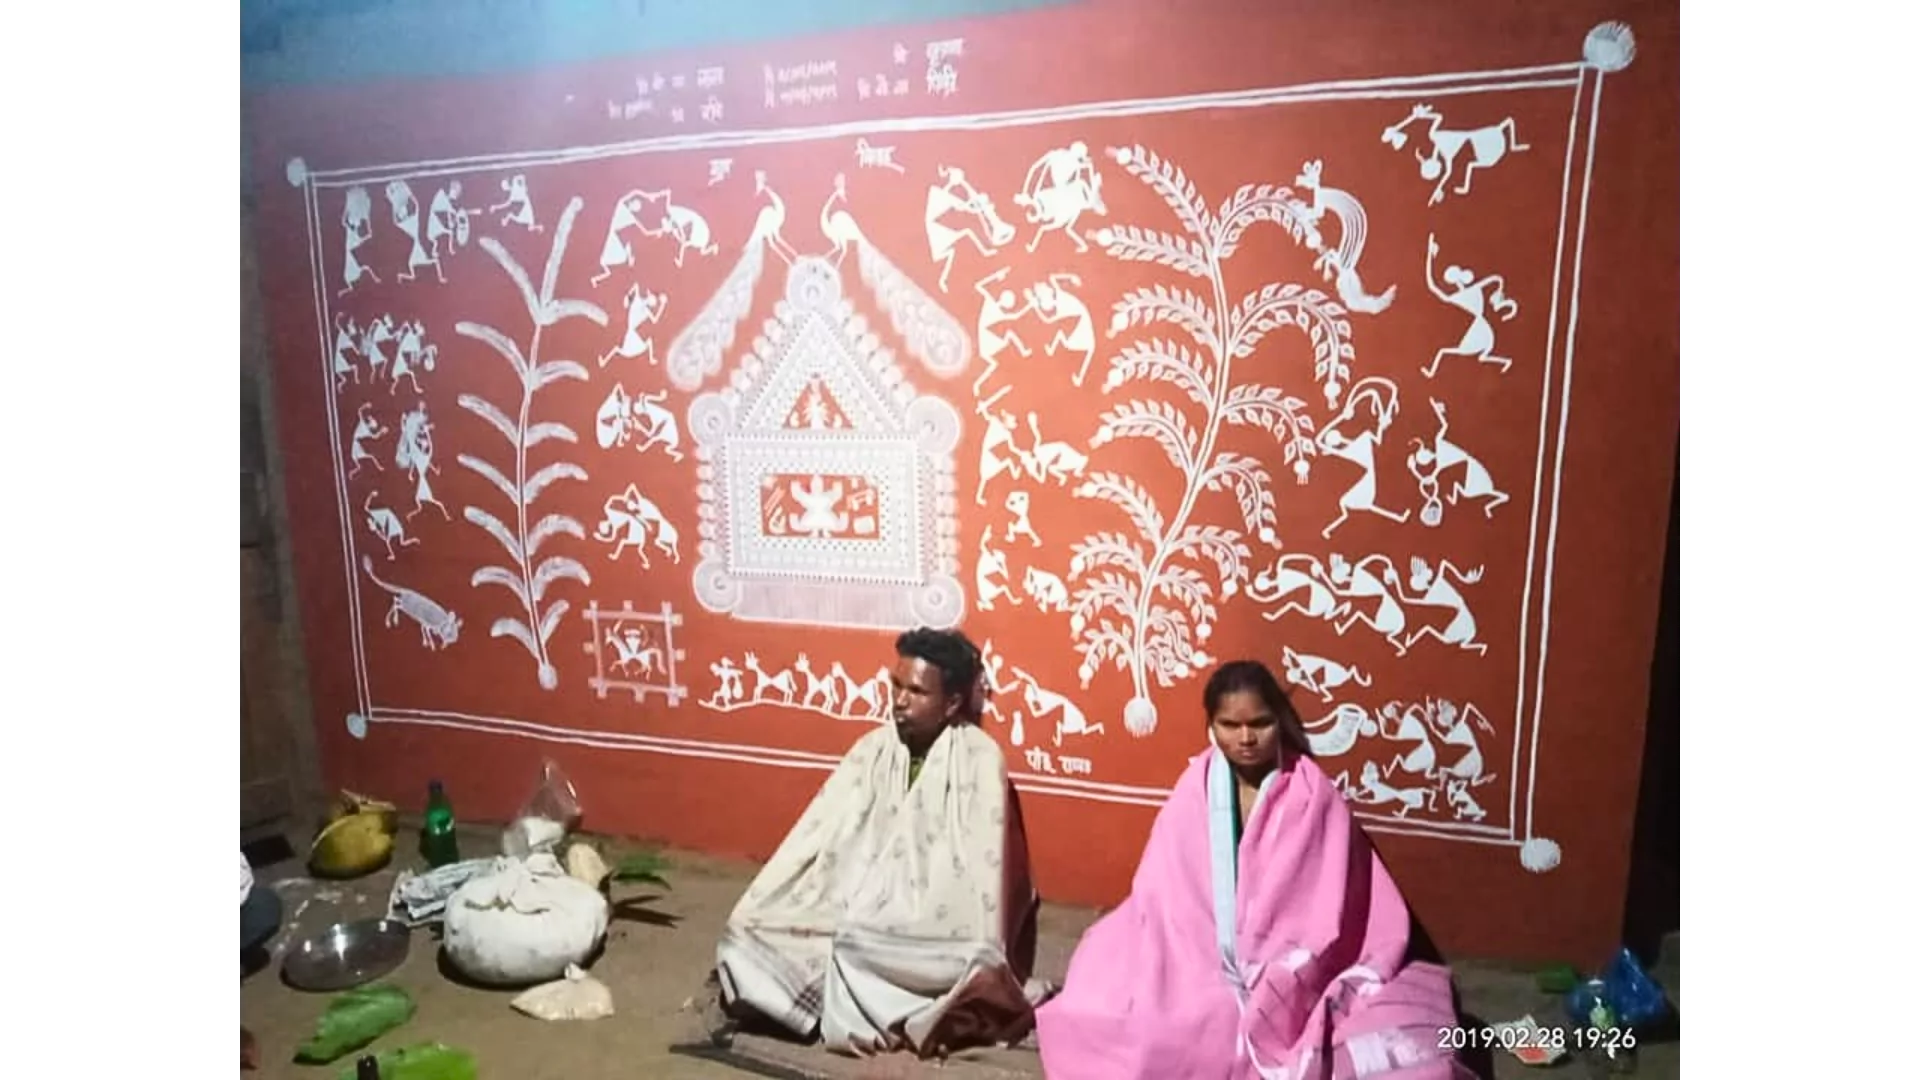 A traditional Warli painting done in white over a red ochre background. Panchasiriya is in the dev chauk in the bottom left of the picture. there is a lagna chauk in the centre.